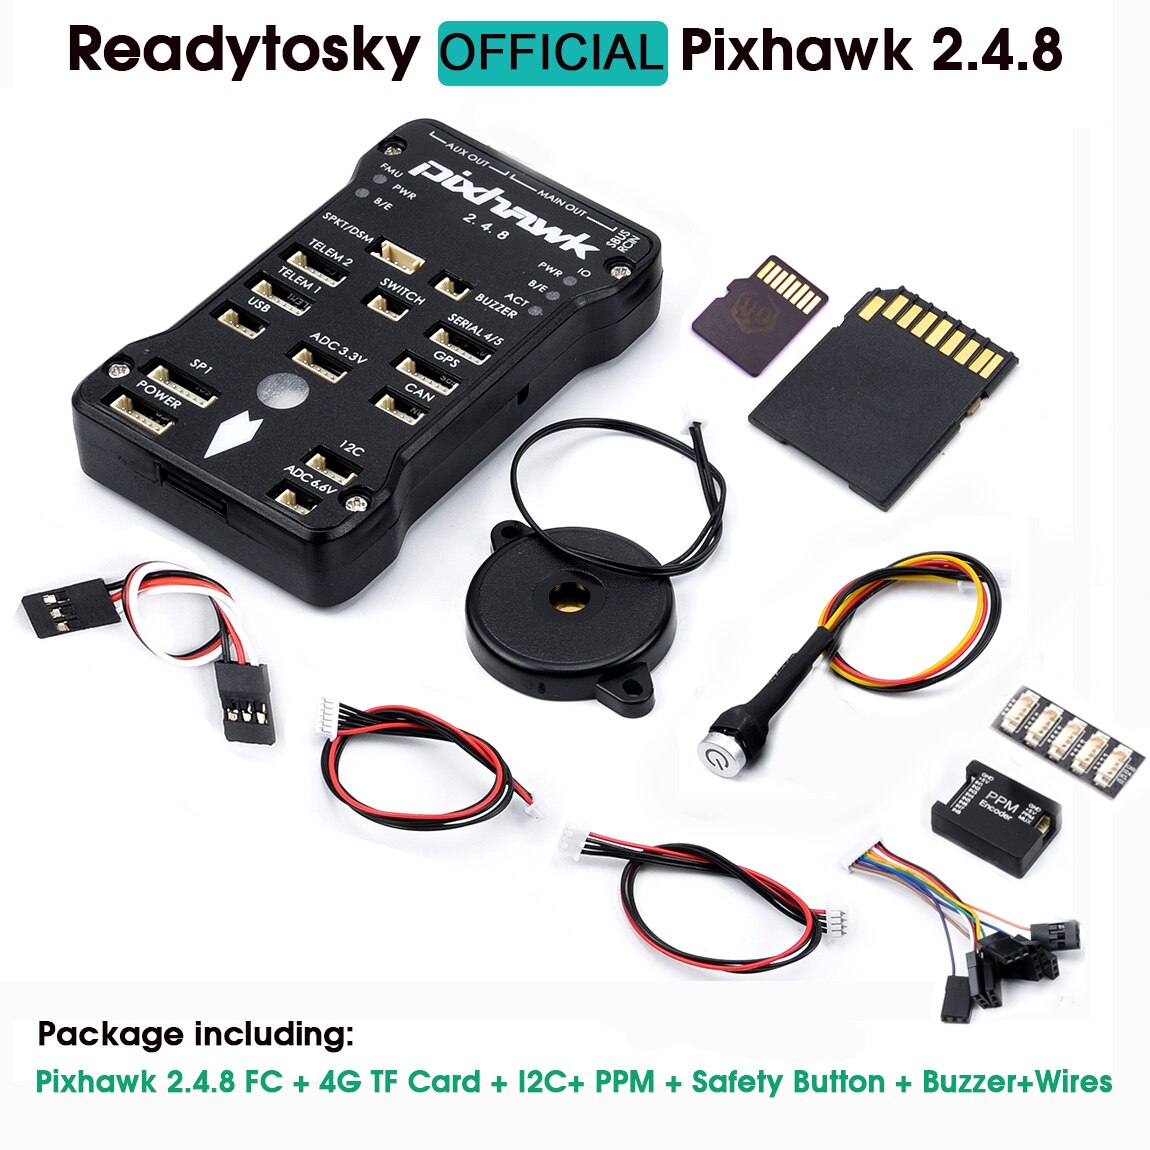 Package includes: Pixhawk 2.4.8 FC + 4G TF Card I2C+